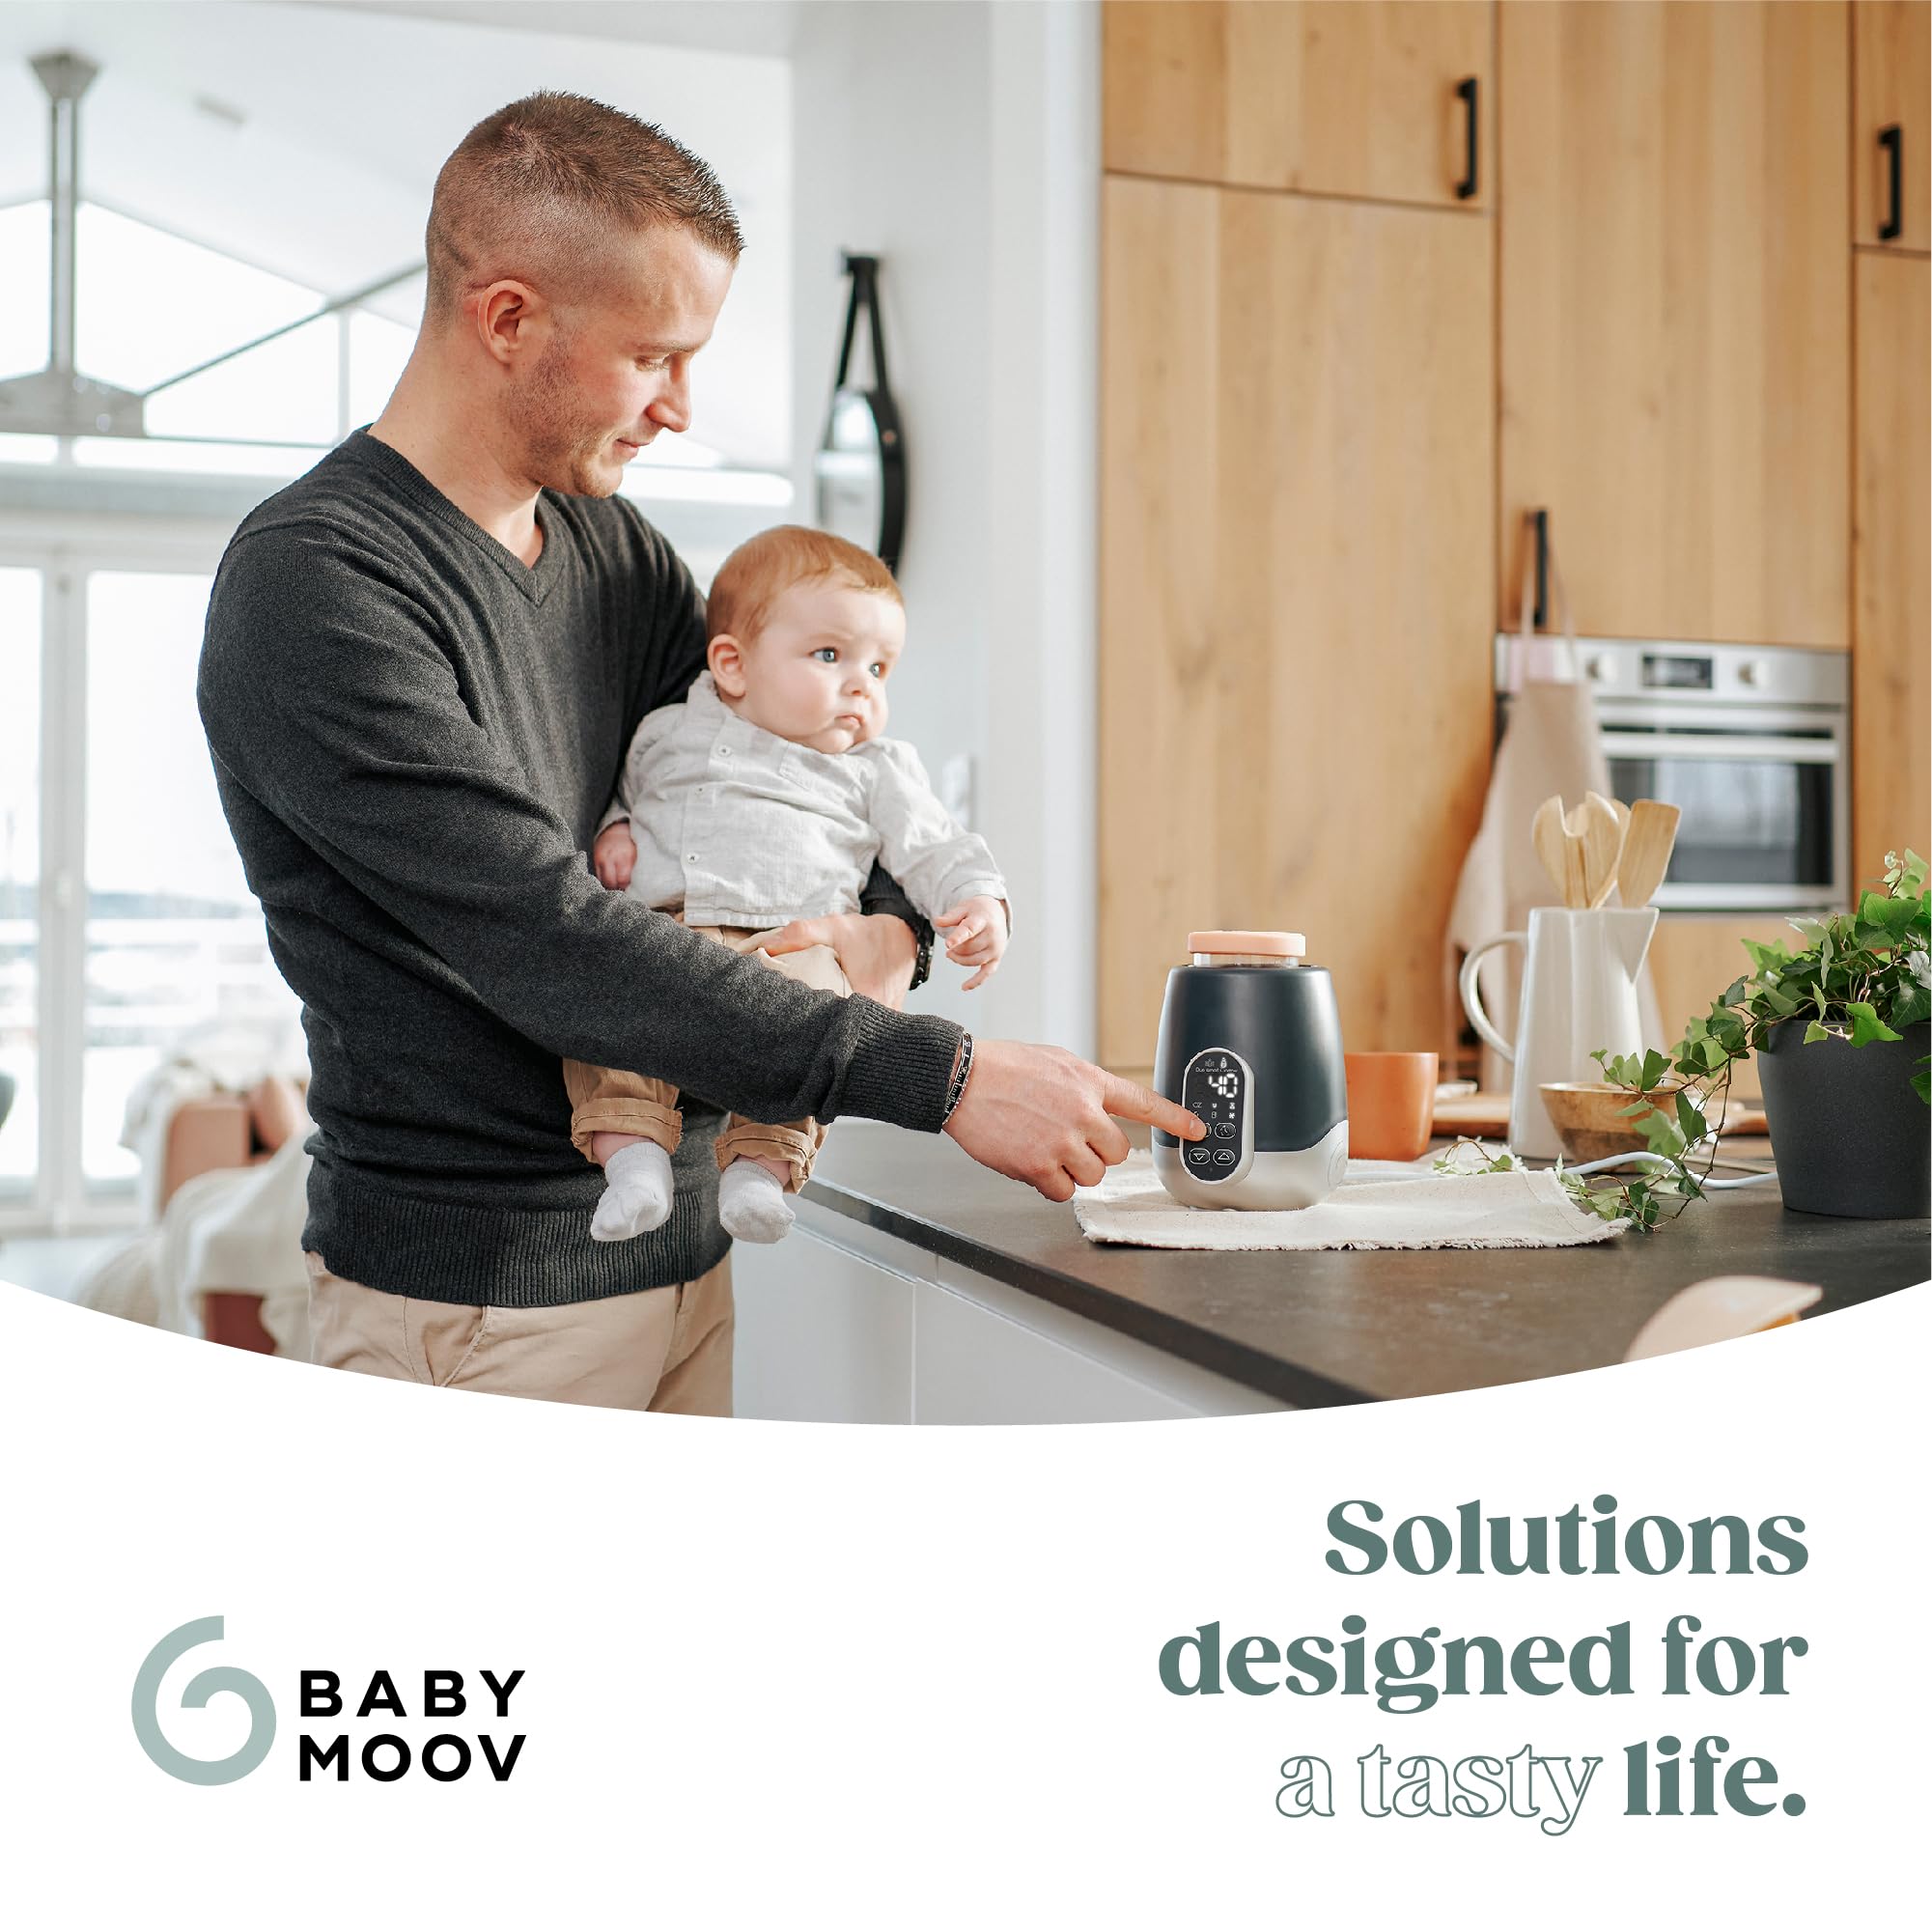 Babymoov Duo Smart Bottle Warmer - 2-in-1 Car and Home, Fast, Programmable, and Portable for Breastmilk or Baby Formula (Multi-Purpose and Universal)